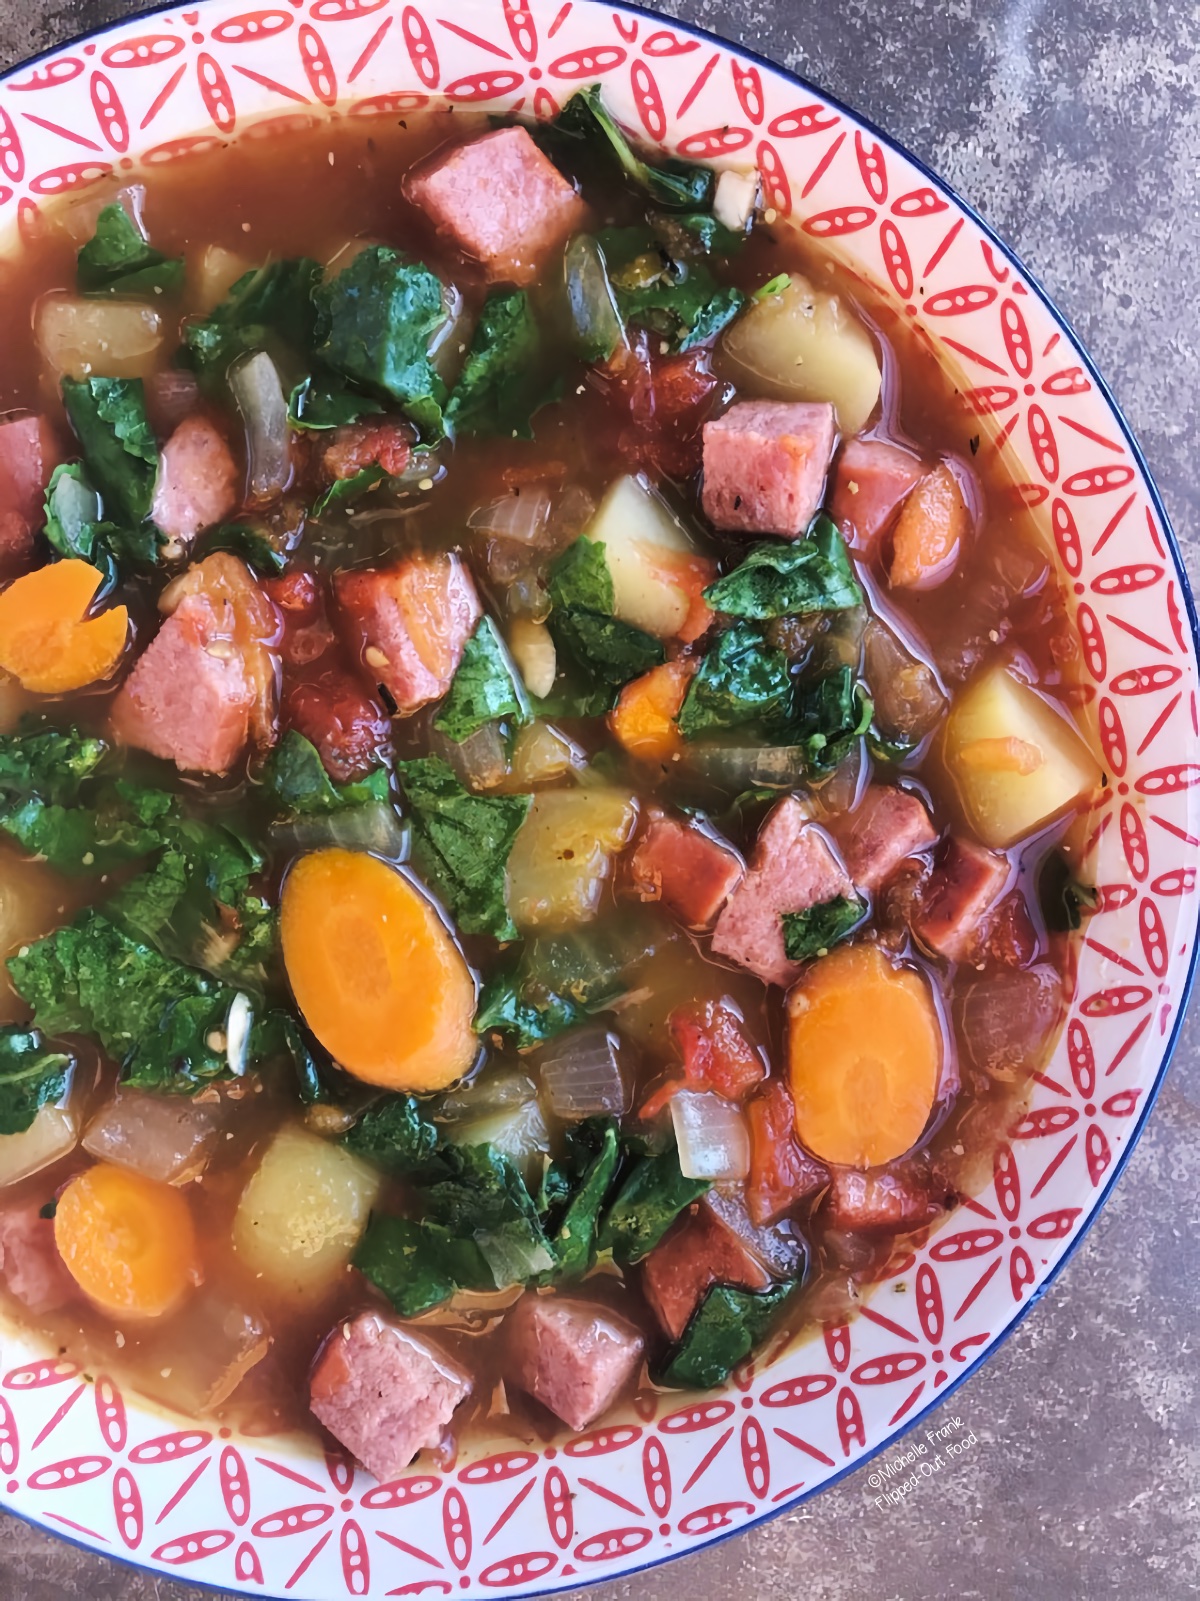 Close-up of a serving of Sausage Kale and Potato Soup in a decorative red and white bowl.